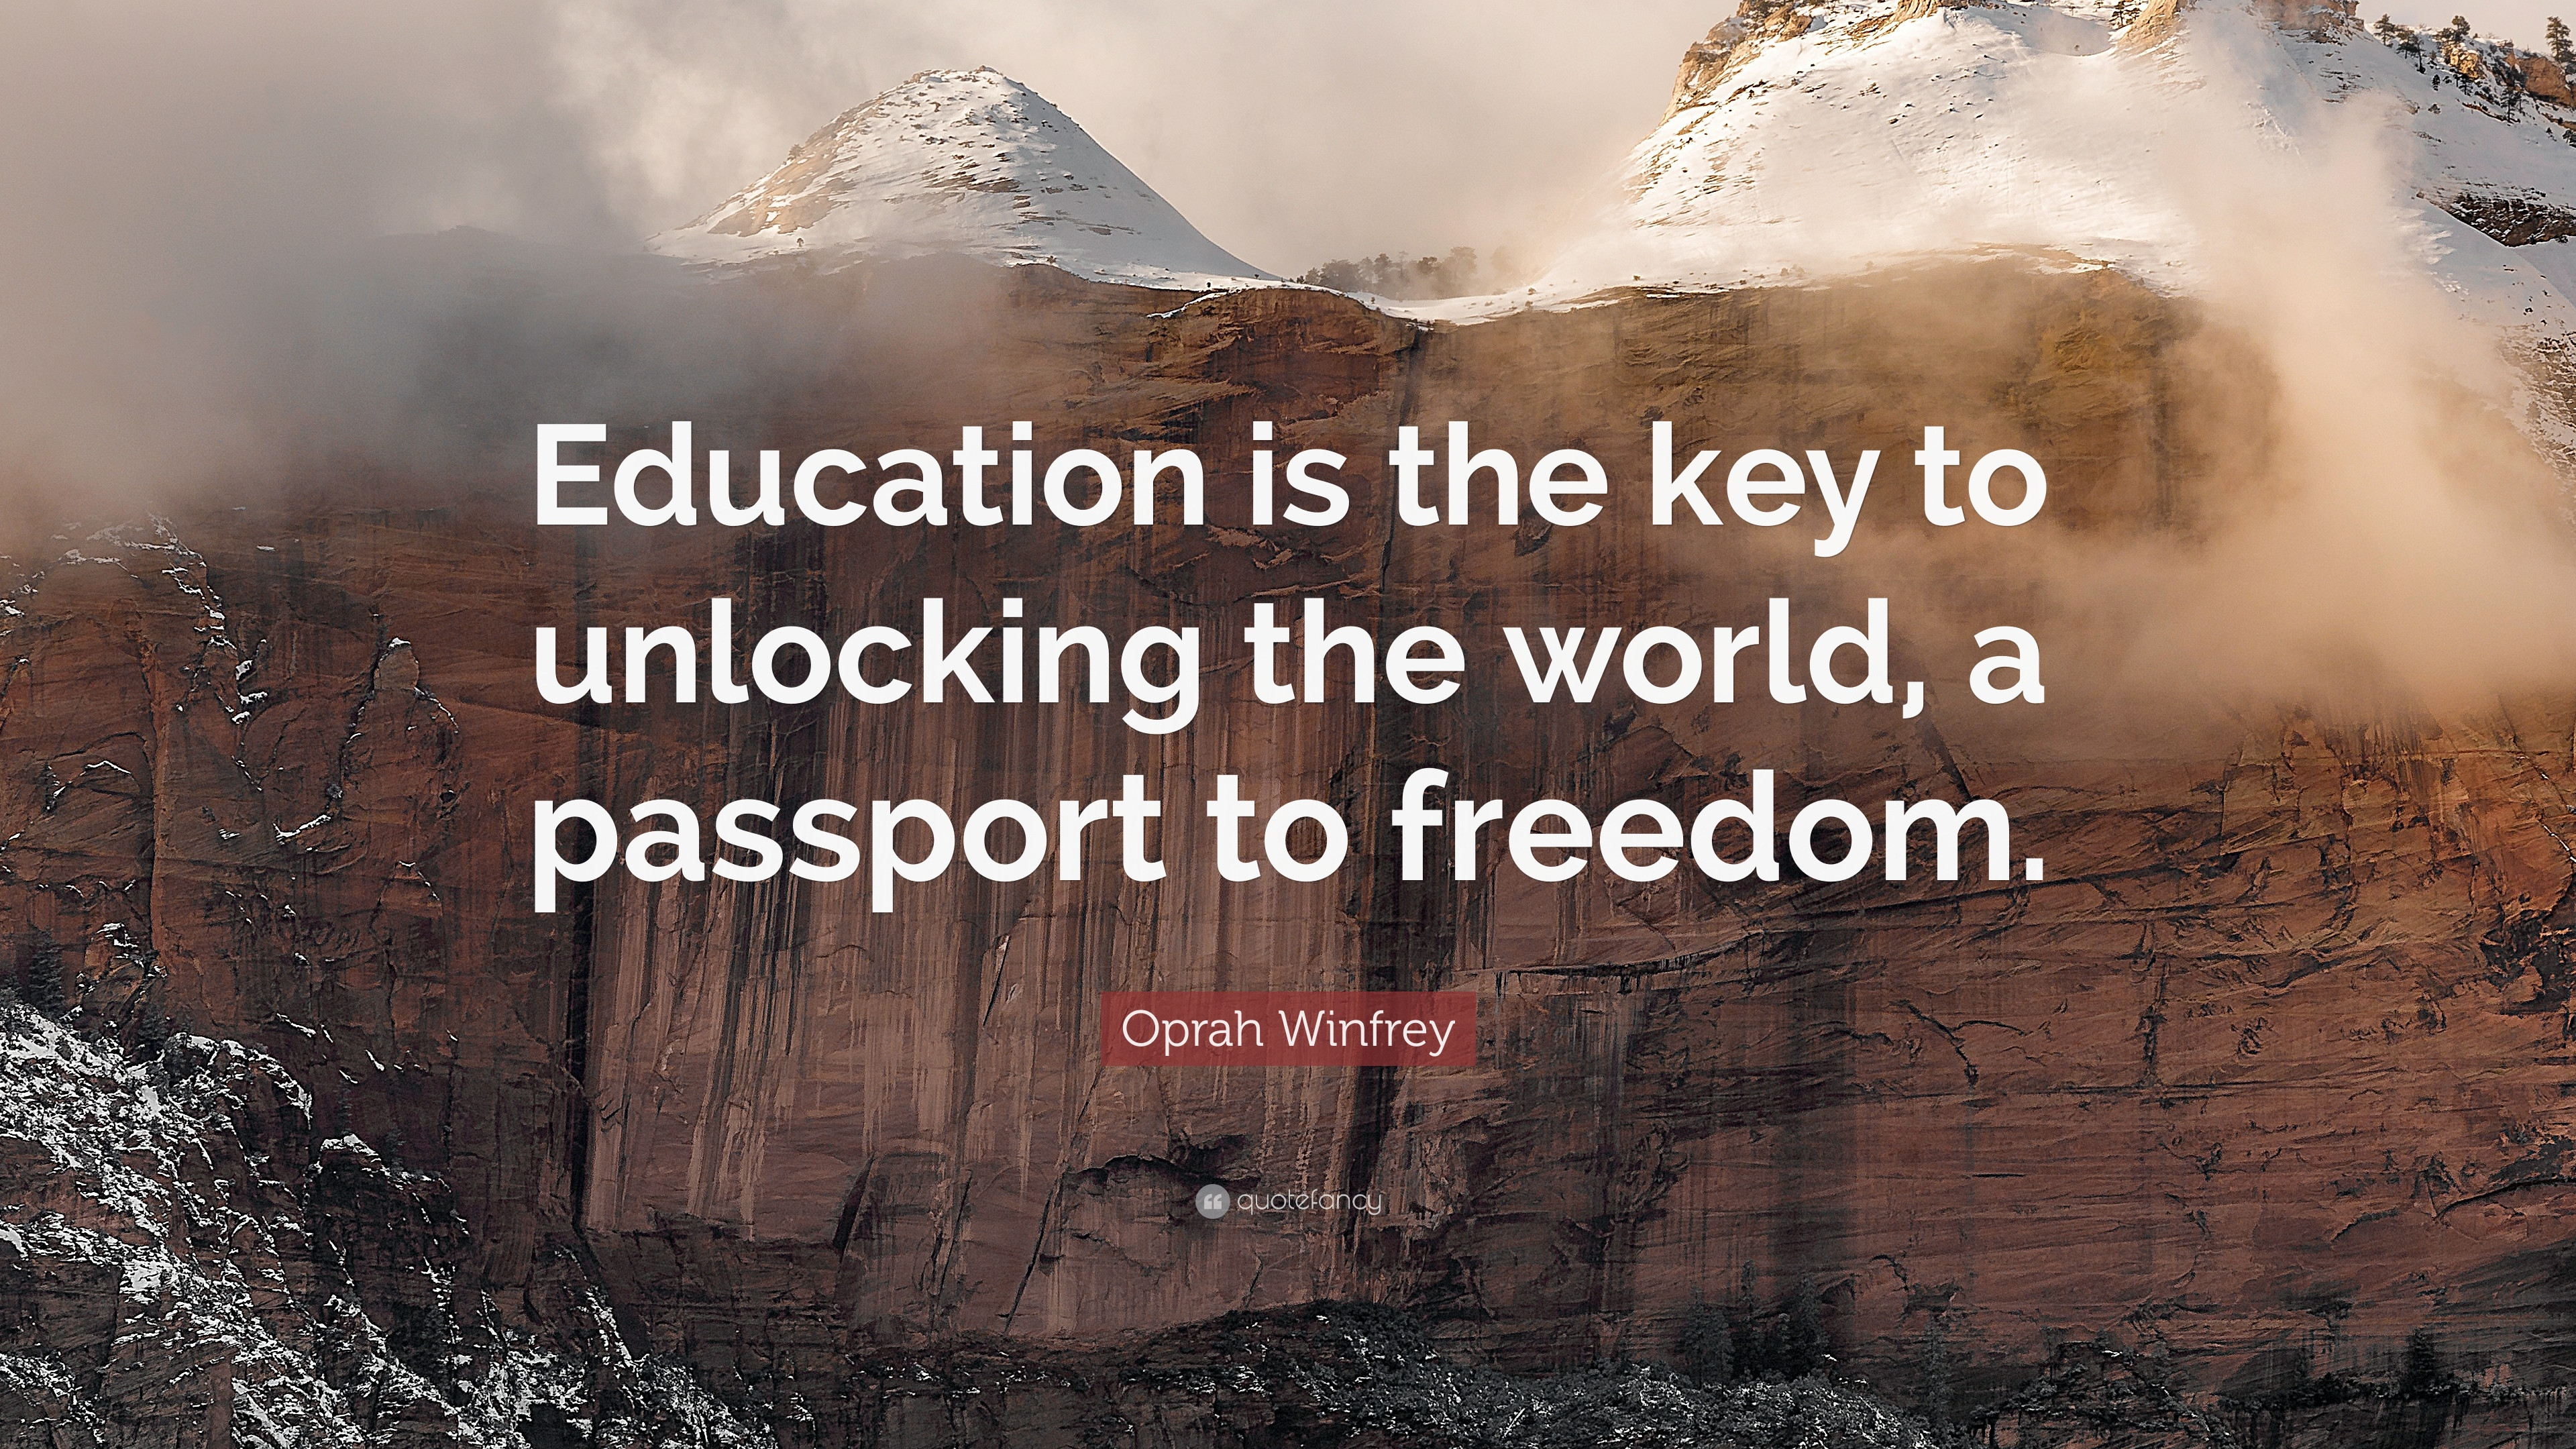 Education Is The Key Quote
 Oprah Winfrey Quote “Education is the key to unlocking